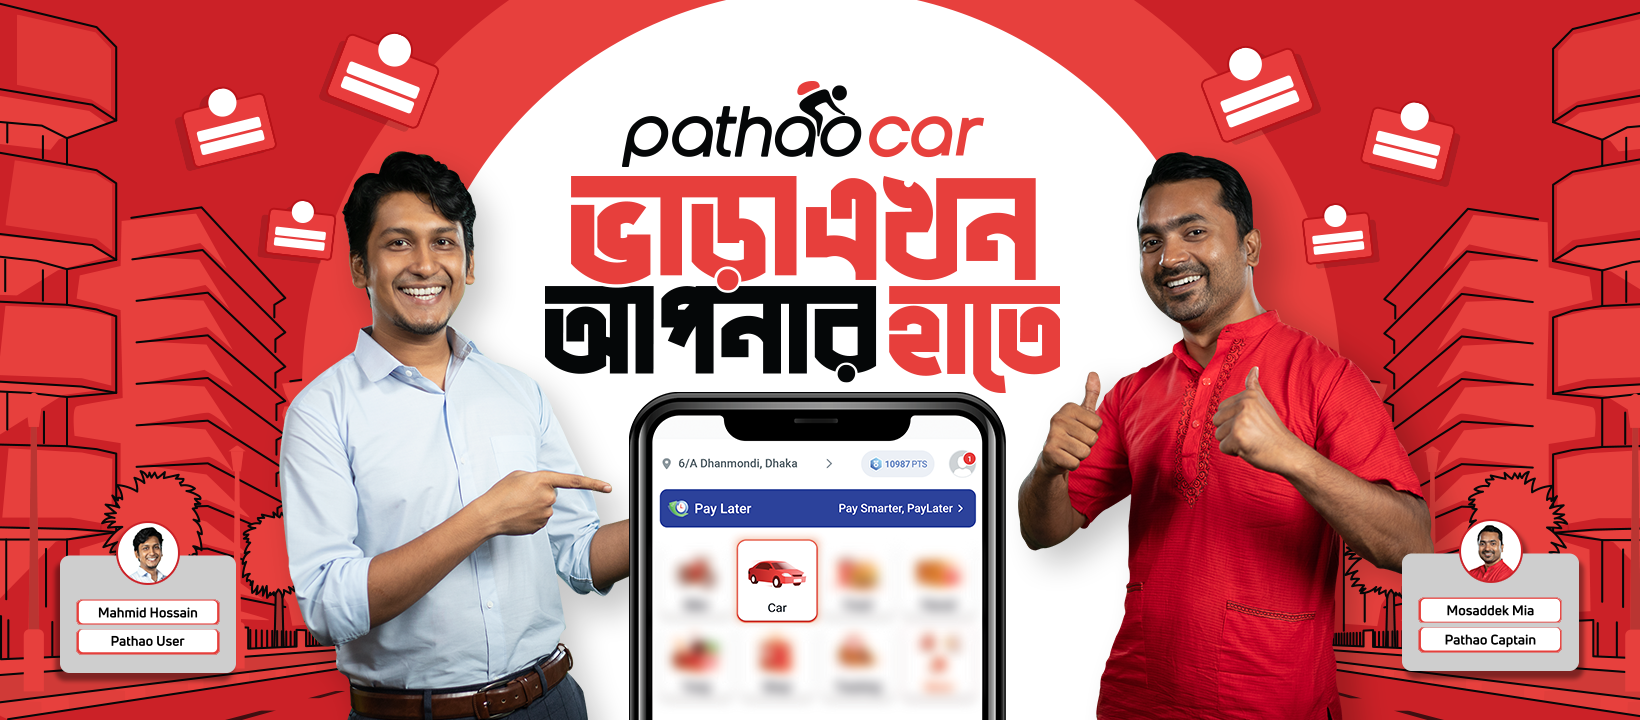 Pathao Car Relaunch